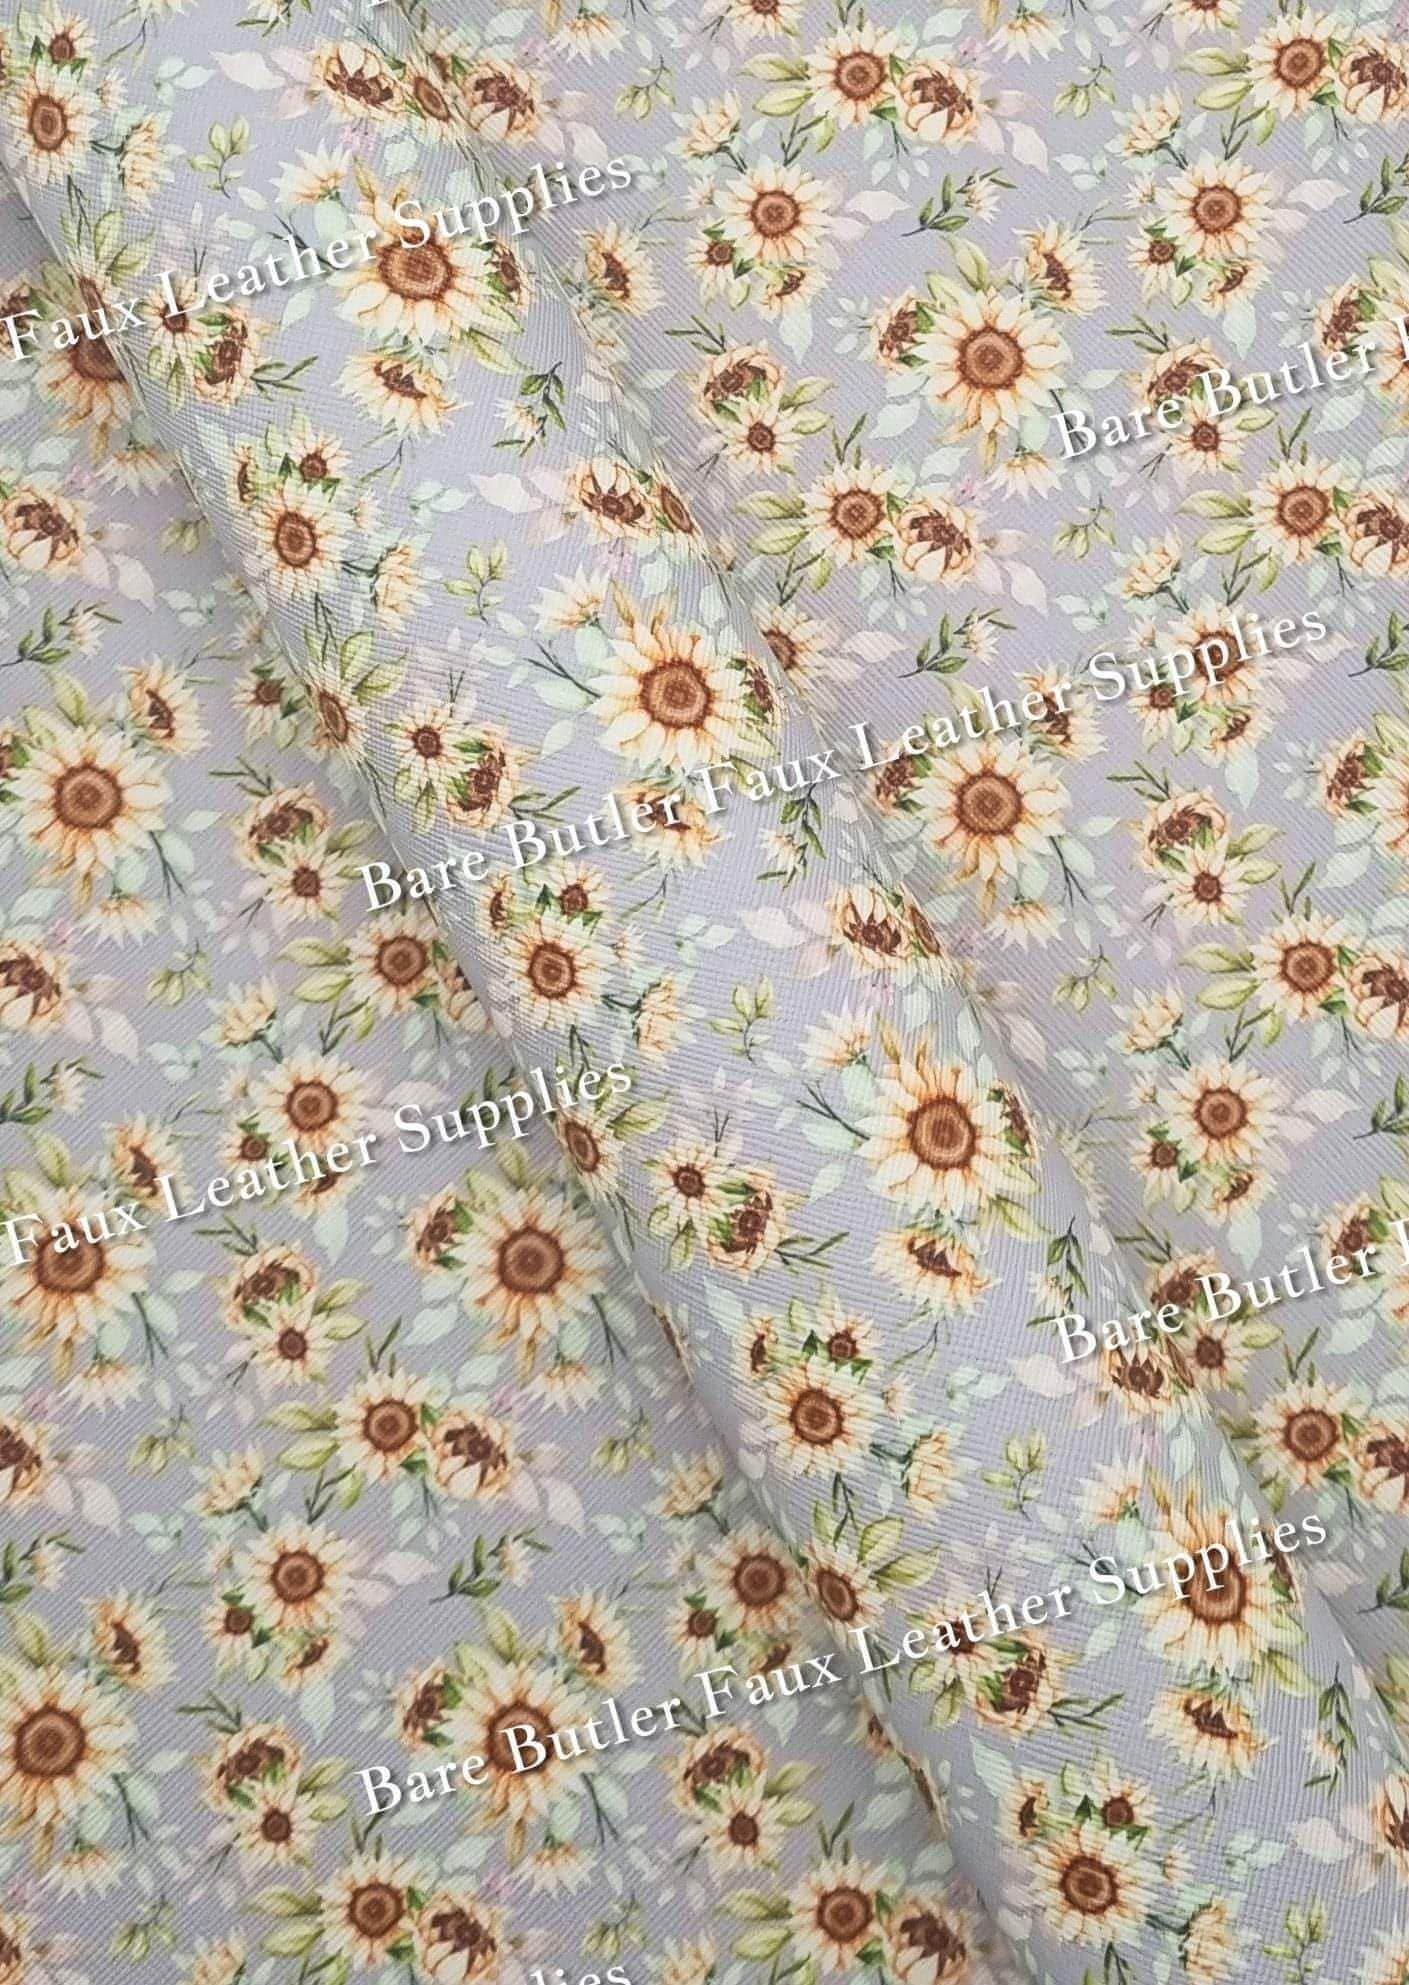 Sunflowers Green (New) Faux Leather - country, Faux, Faux Leather, Flora, floral, Florals, flower, Flowers, Leather, litchi, spring, Sunflower, sunflowers - Bare Butler Faux Leather Supplies 